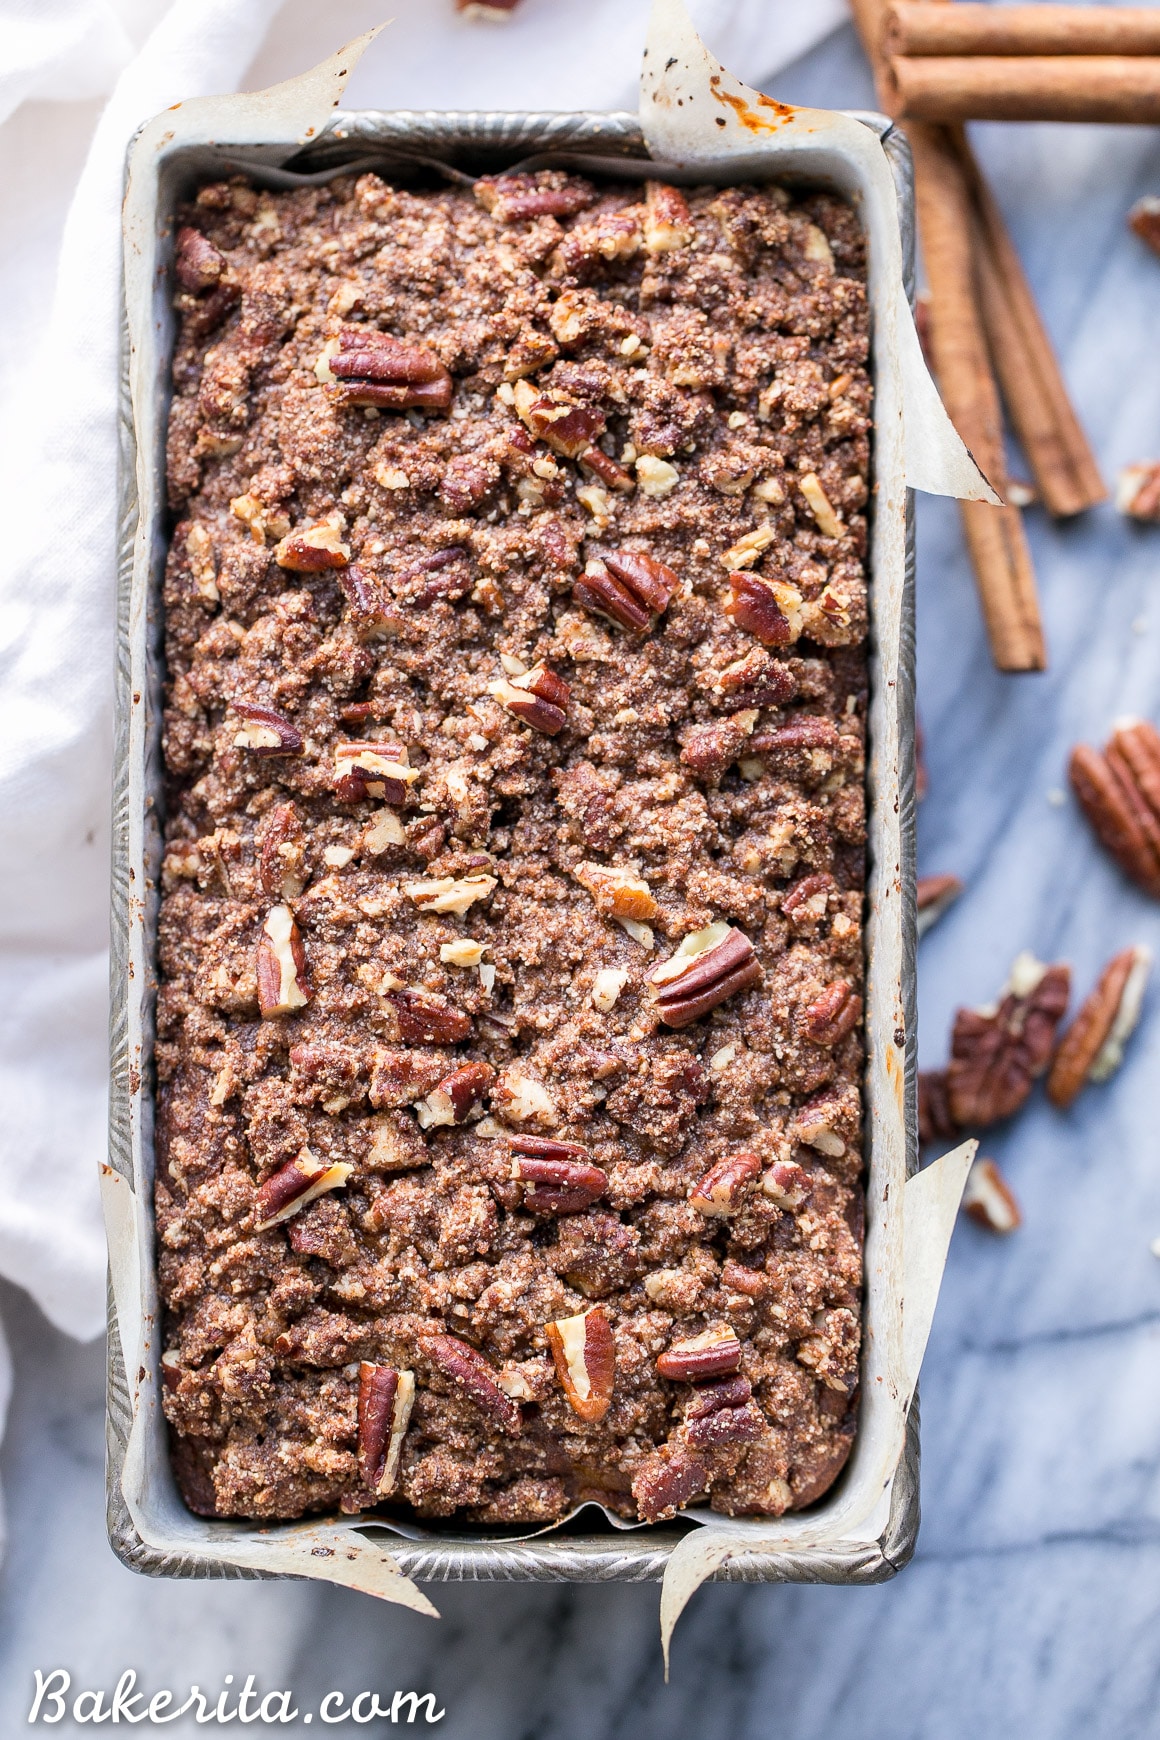 This Paleo Cinnamon Streusel Banana Bread has a layer of pecan crumble in the center and on top, creating a ripple of cinnamon flavor throughout the whole loaf of banana bread. This moist gluten-free + refined sugar free bread is sweetened with bananas and made with coconut flour.